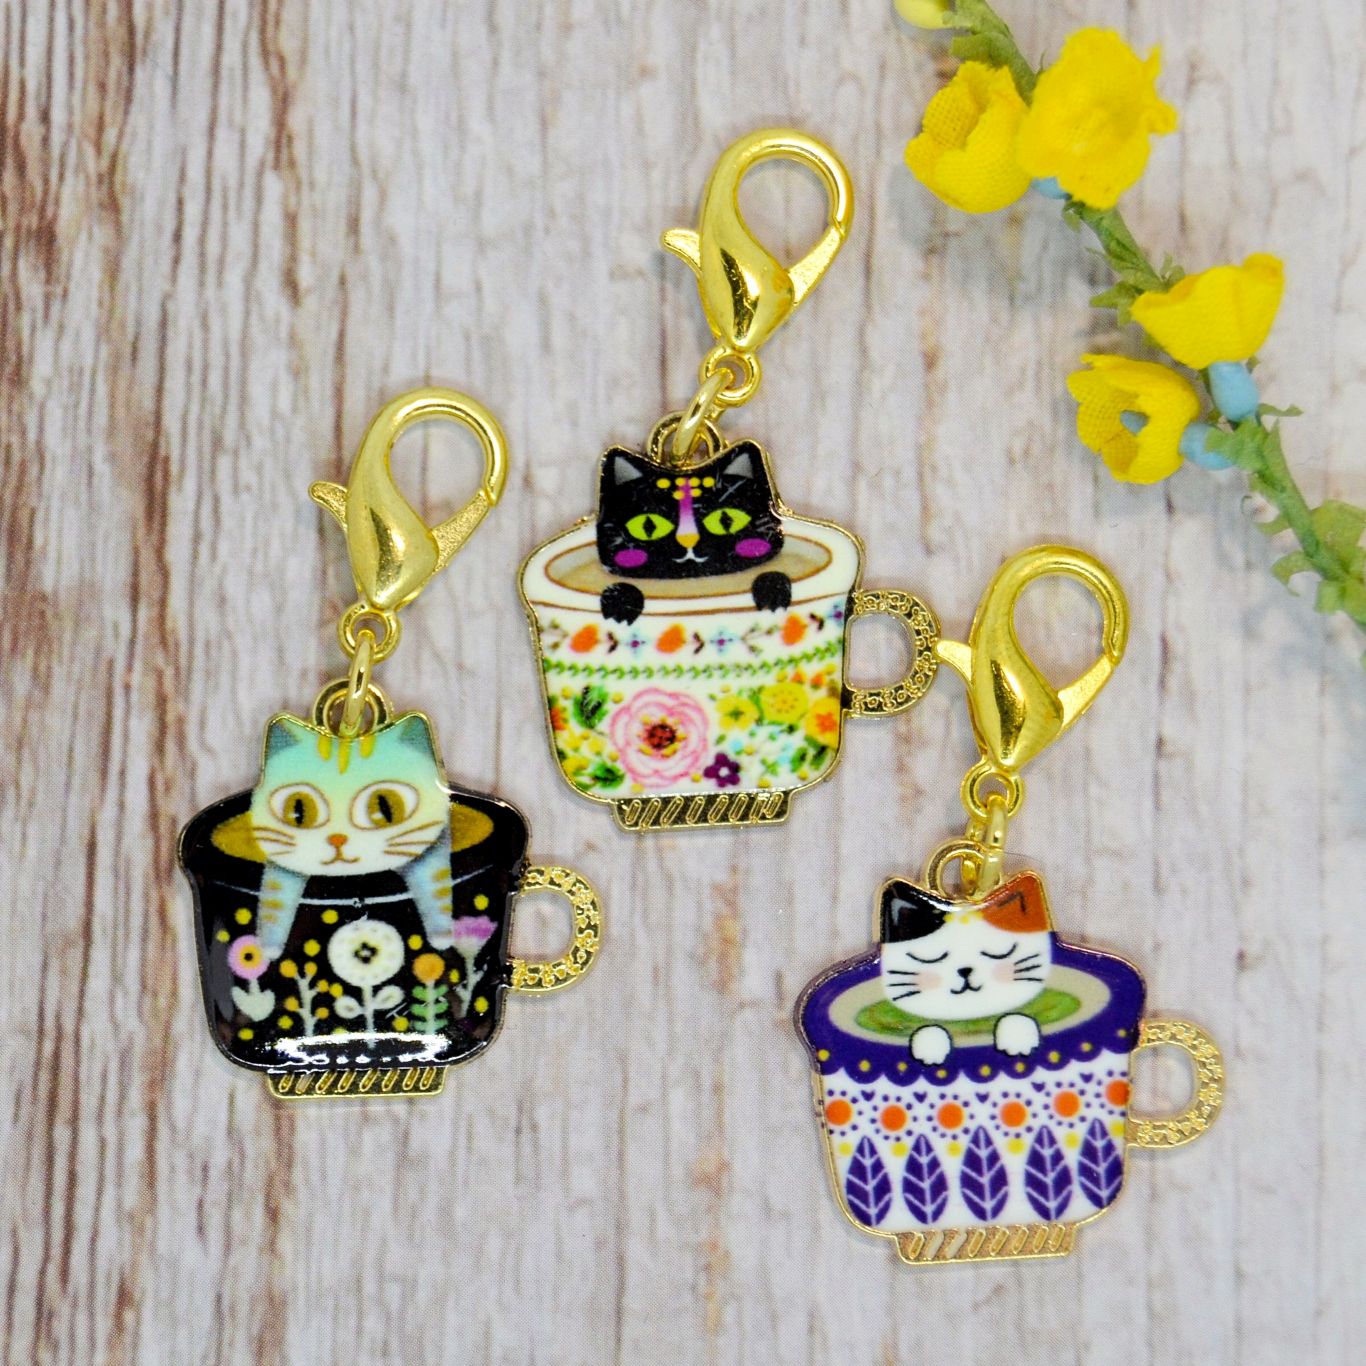 Adorable set of 3 romantic, enamelled stitch markers or progress keepers depicting cheeky cats in mugs